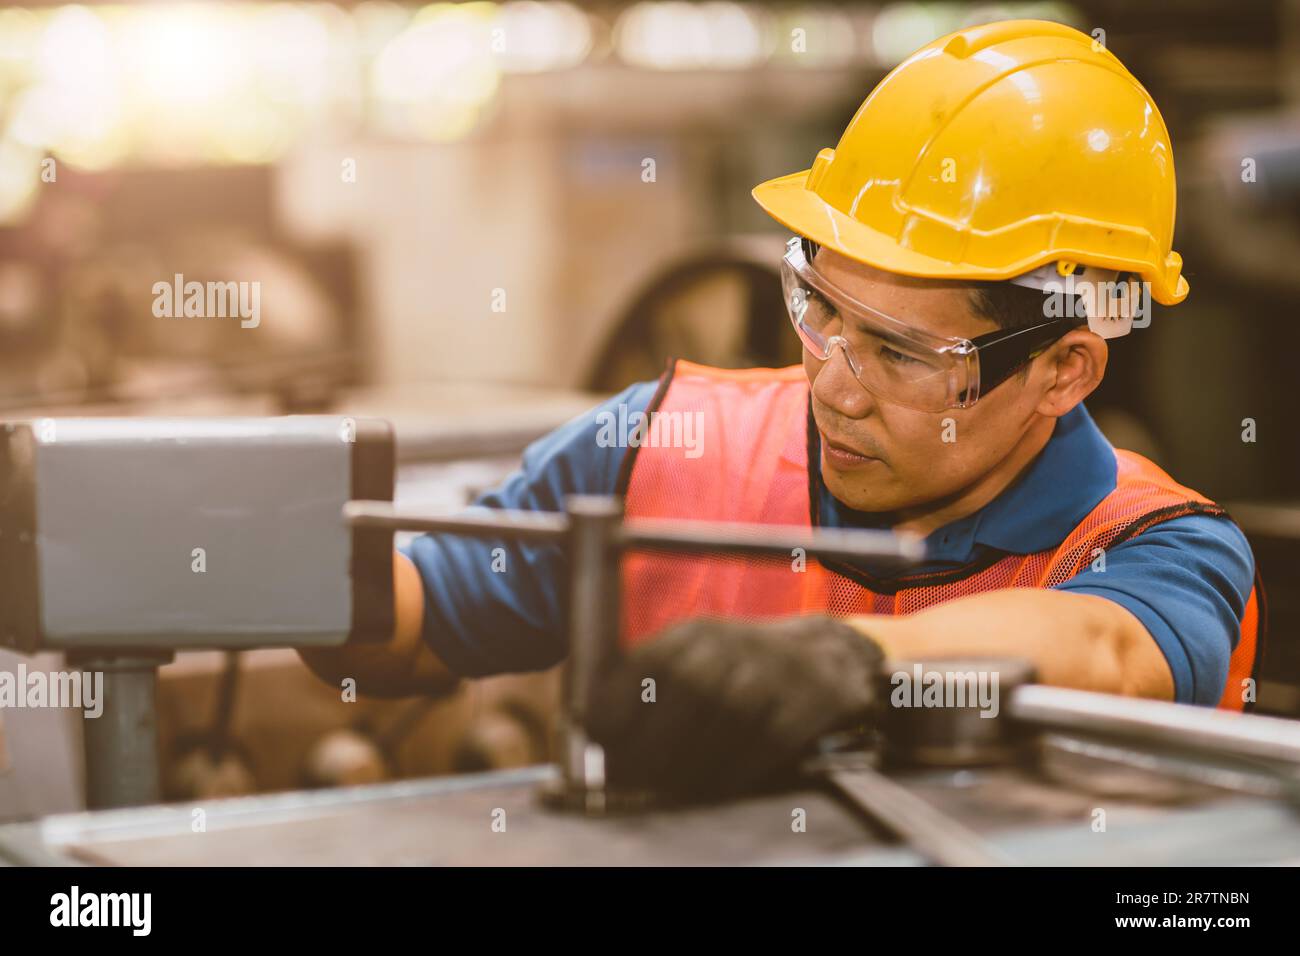 Male mechanic worker with safety helmet working labor in metal industry factory with steel machining. Stock Photo